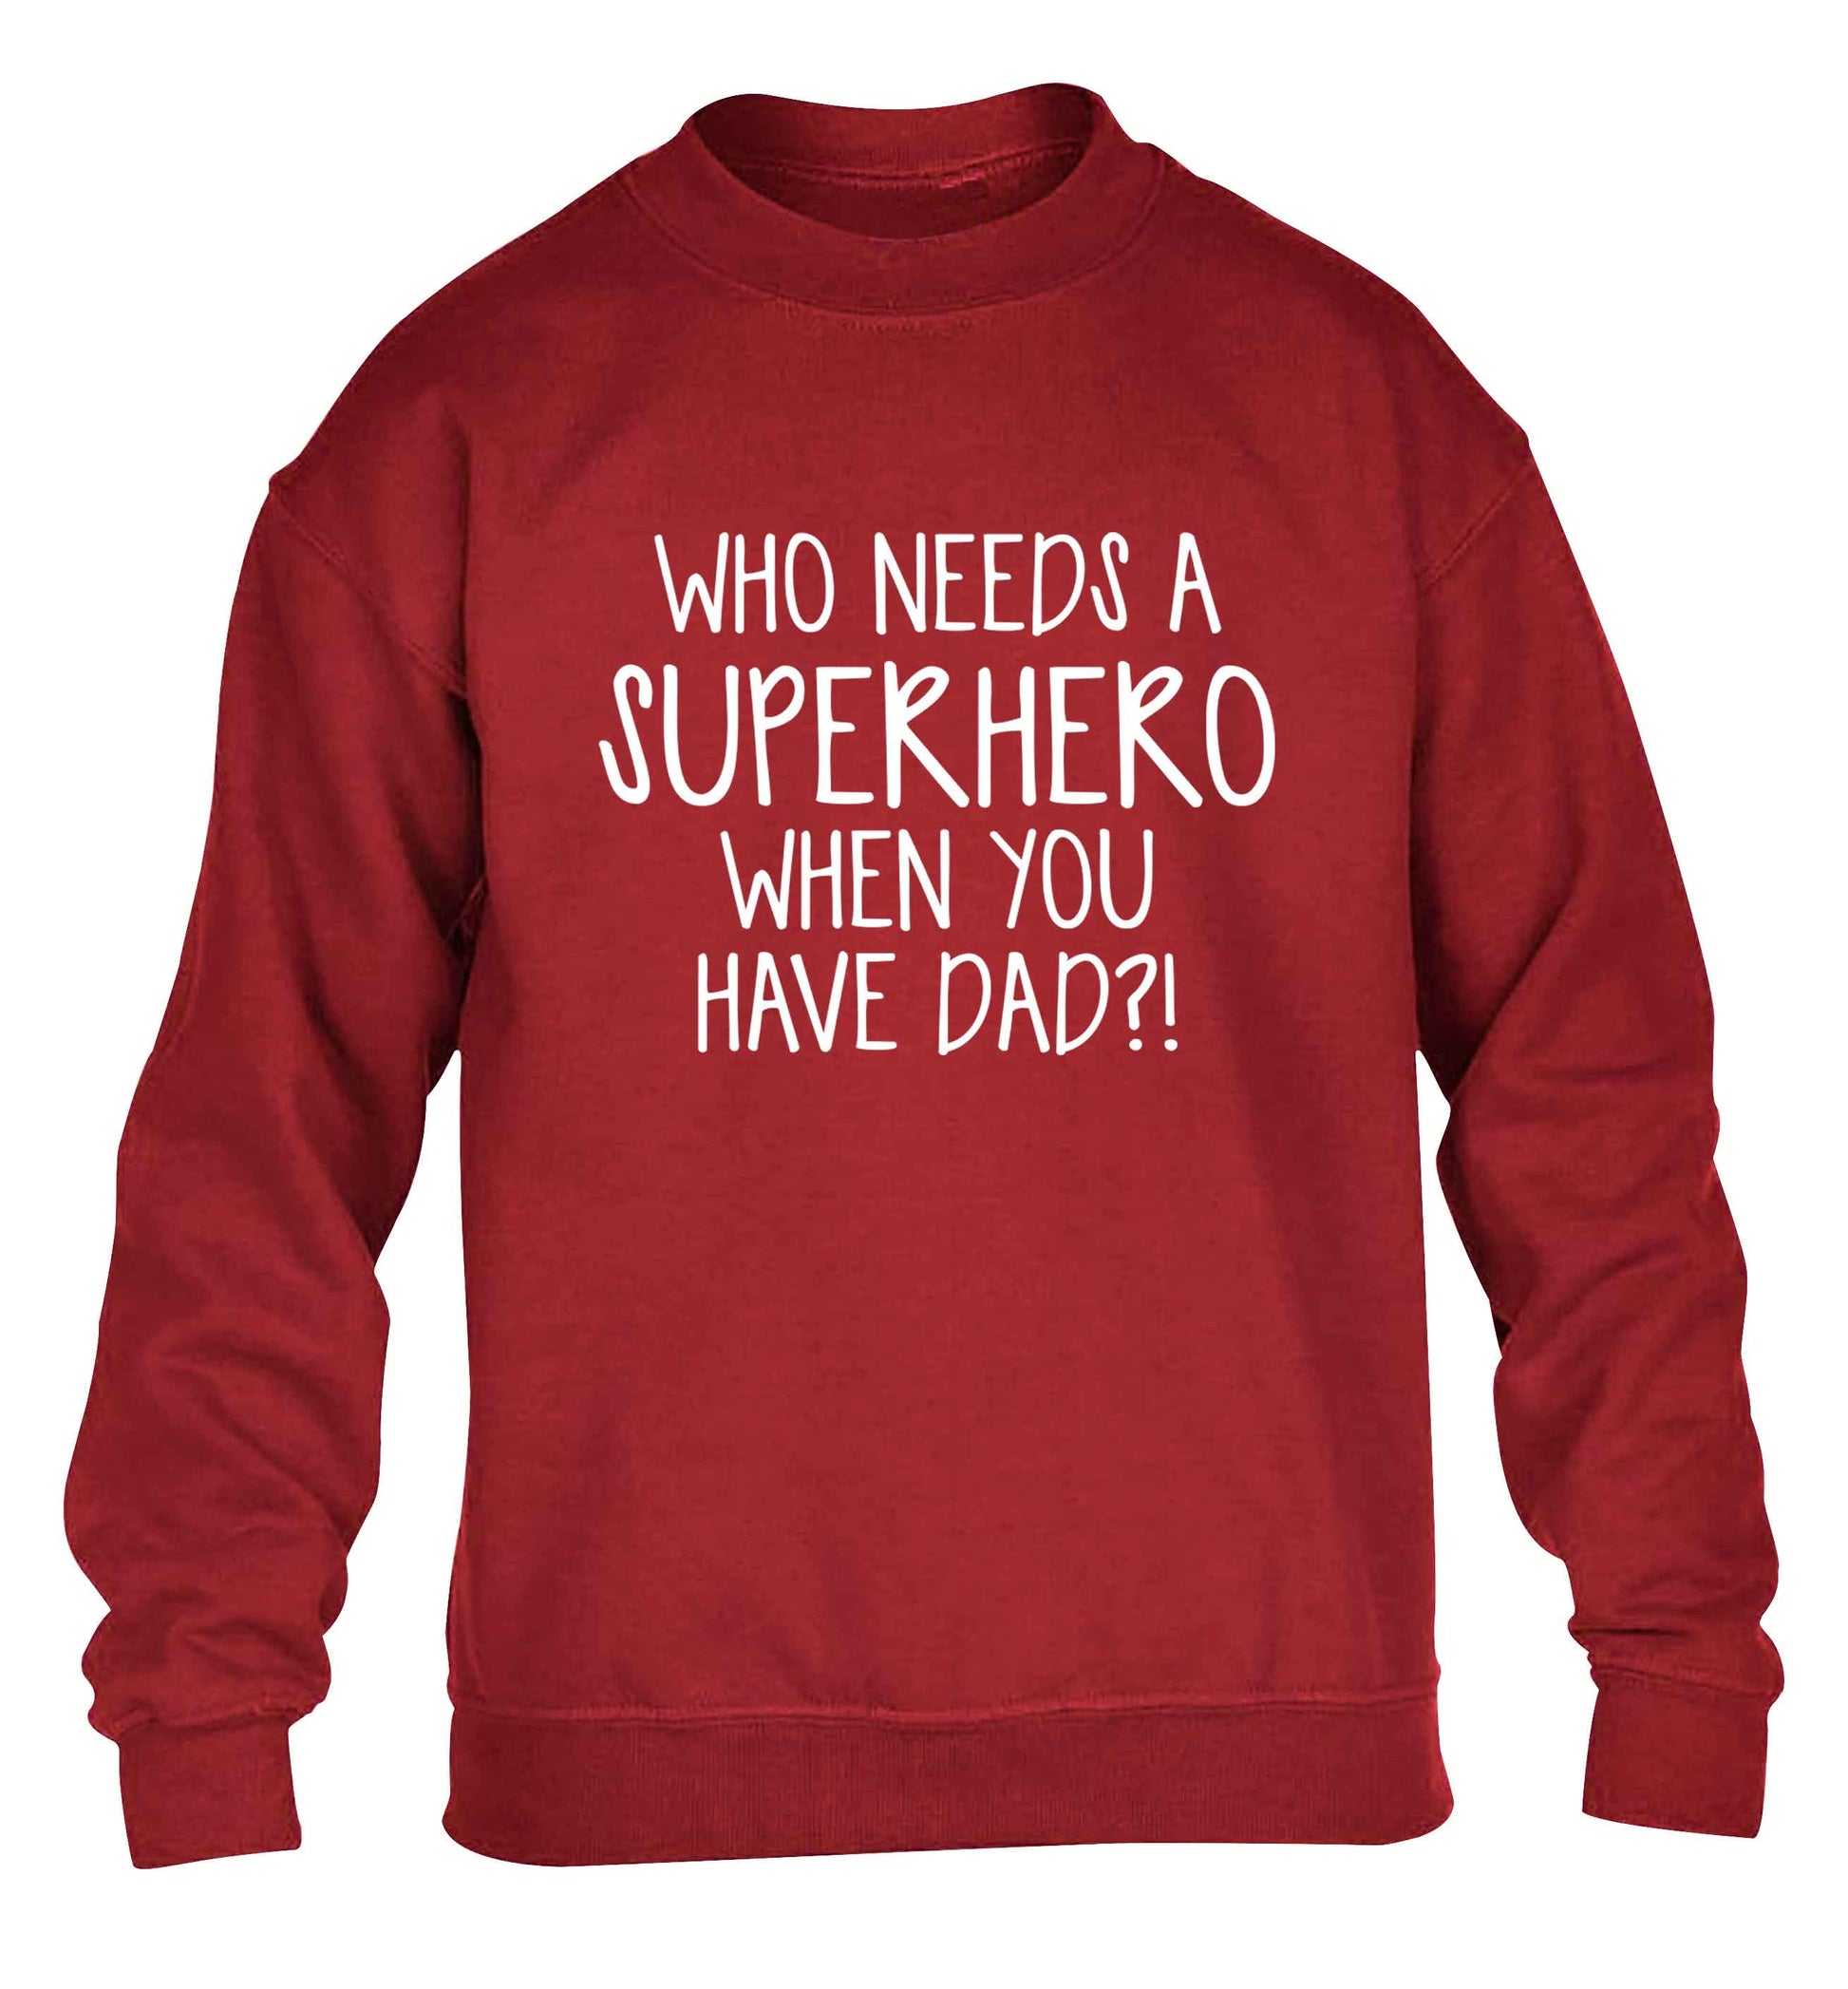 Who needs a superhero when you have dad! children's grey sweater 12-13 Years